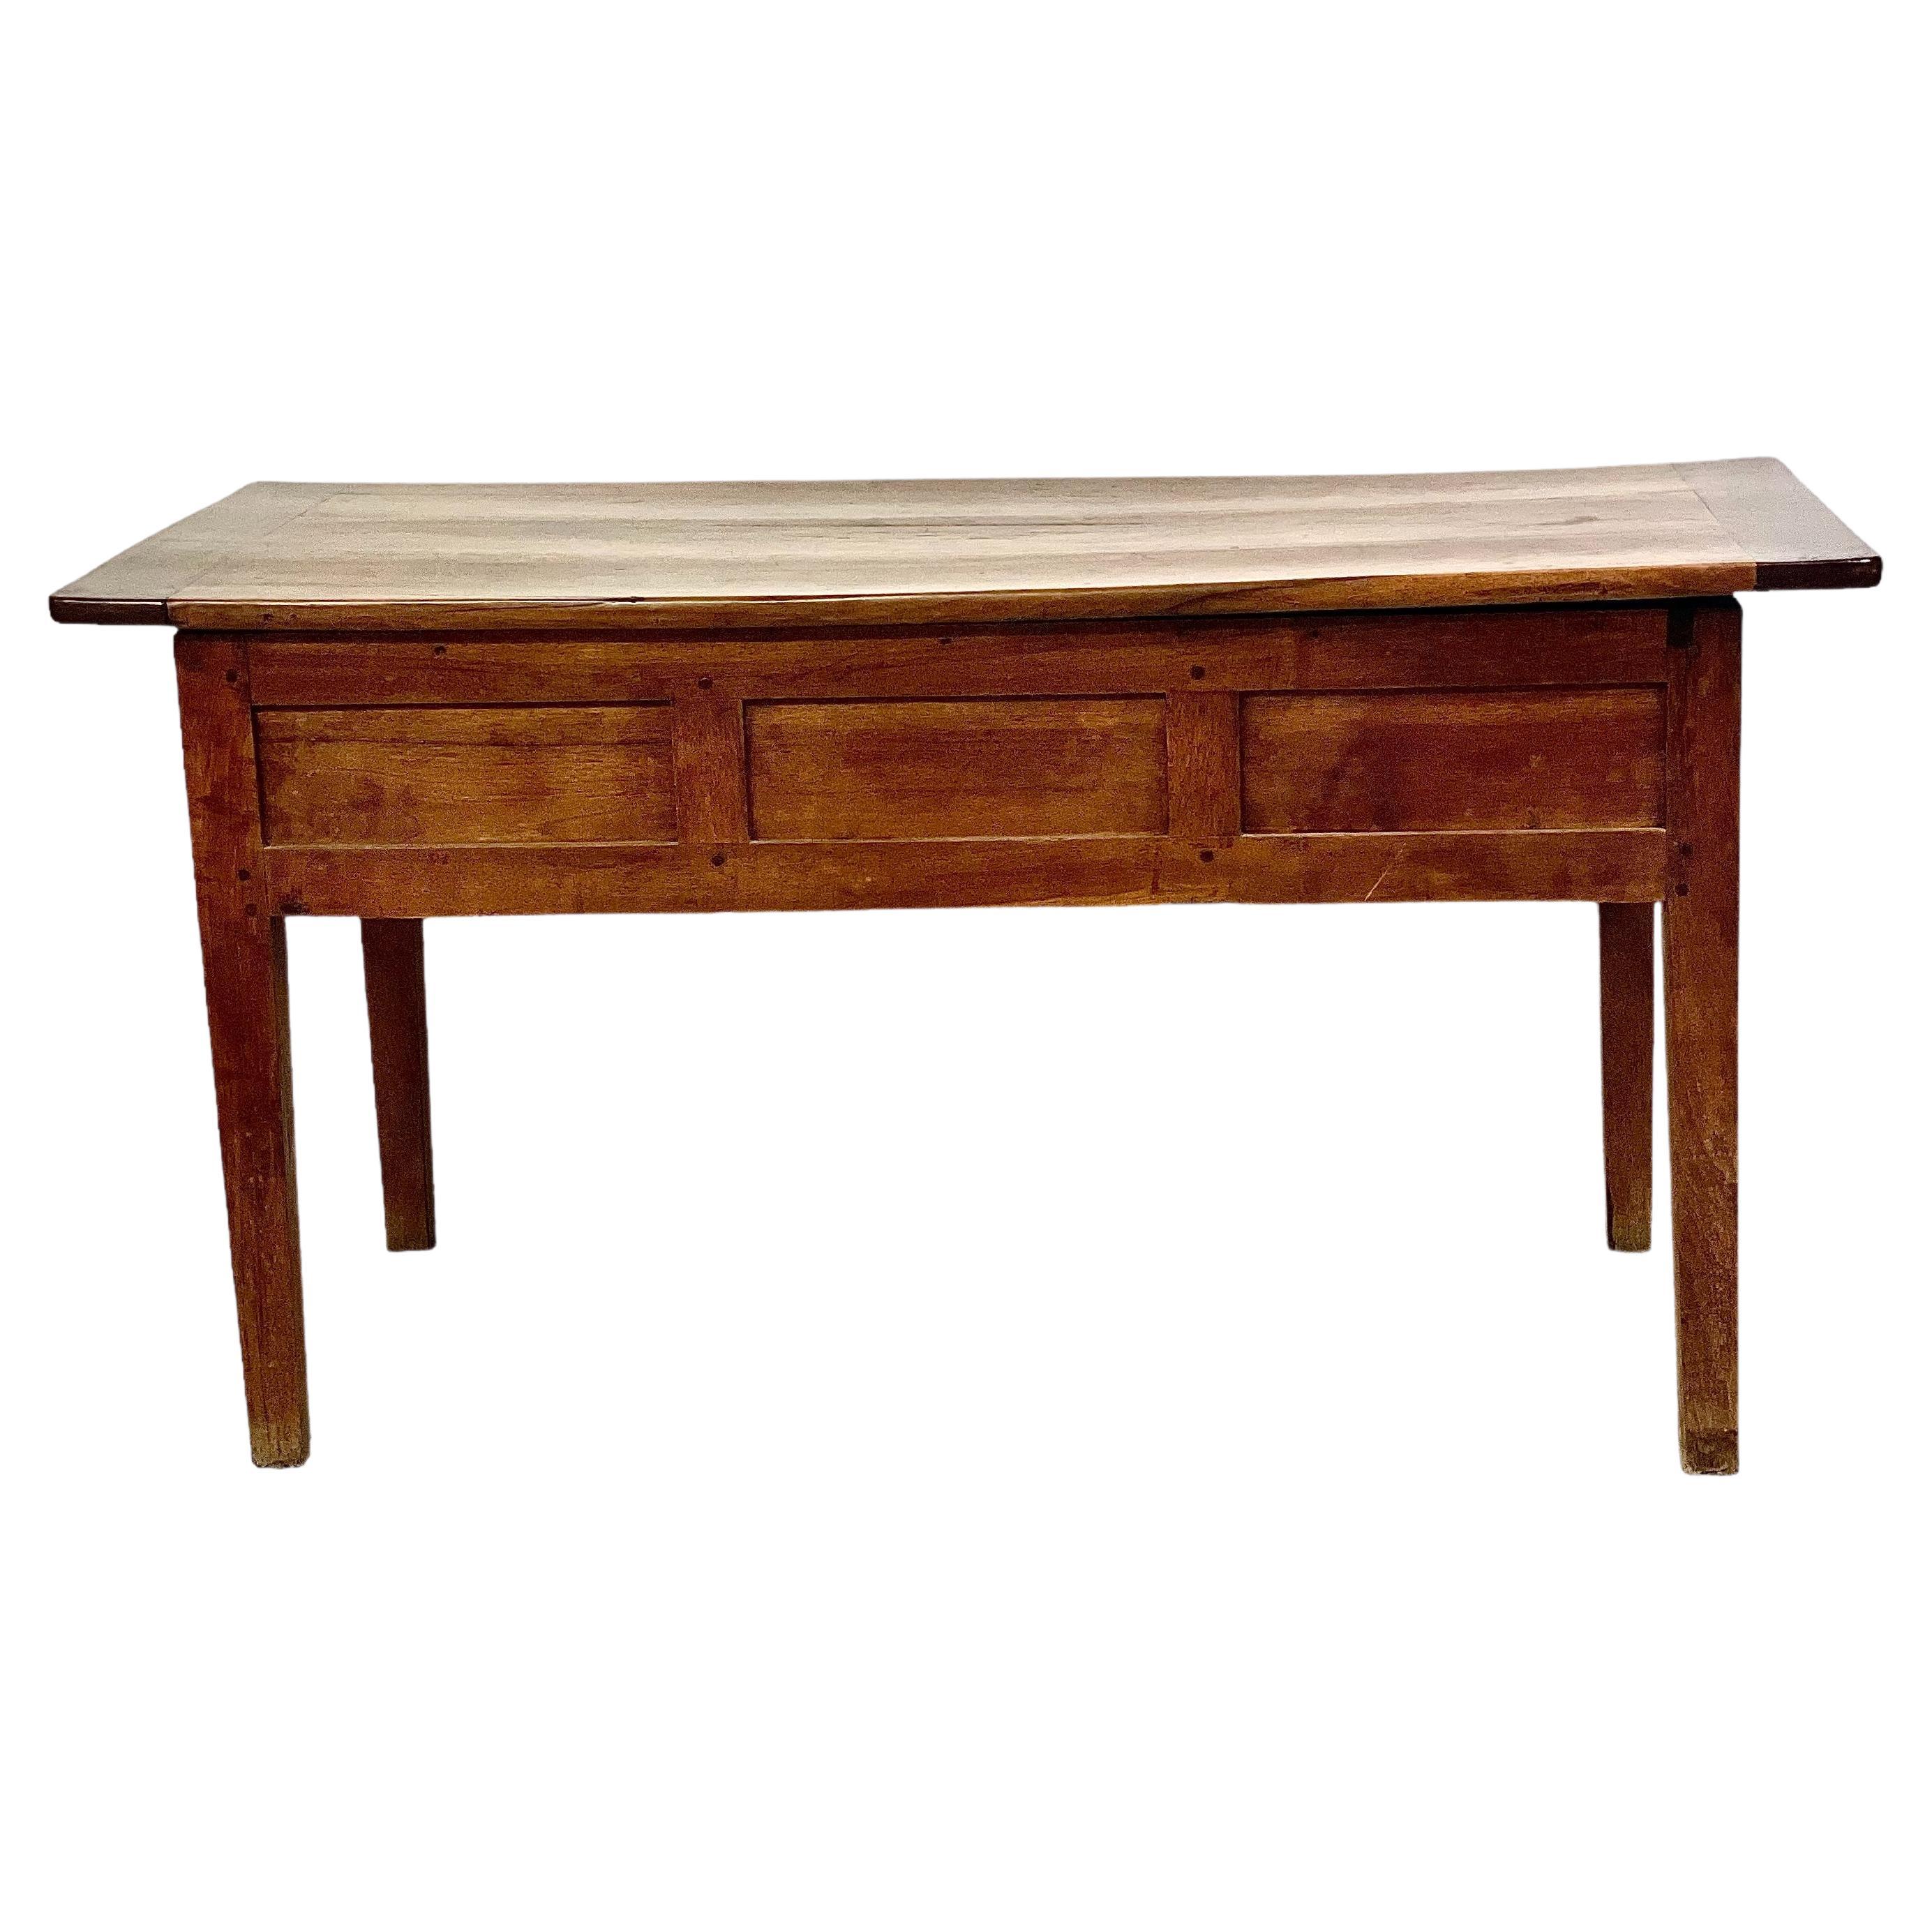  19th Century French Pétrin or Kneading Table For Sale